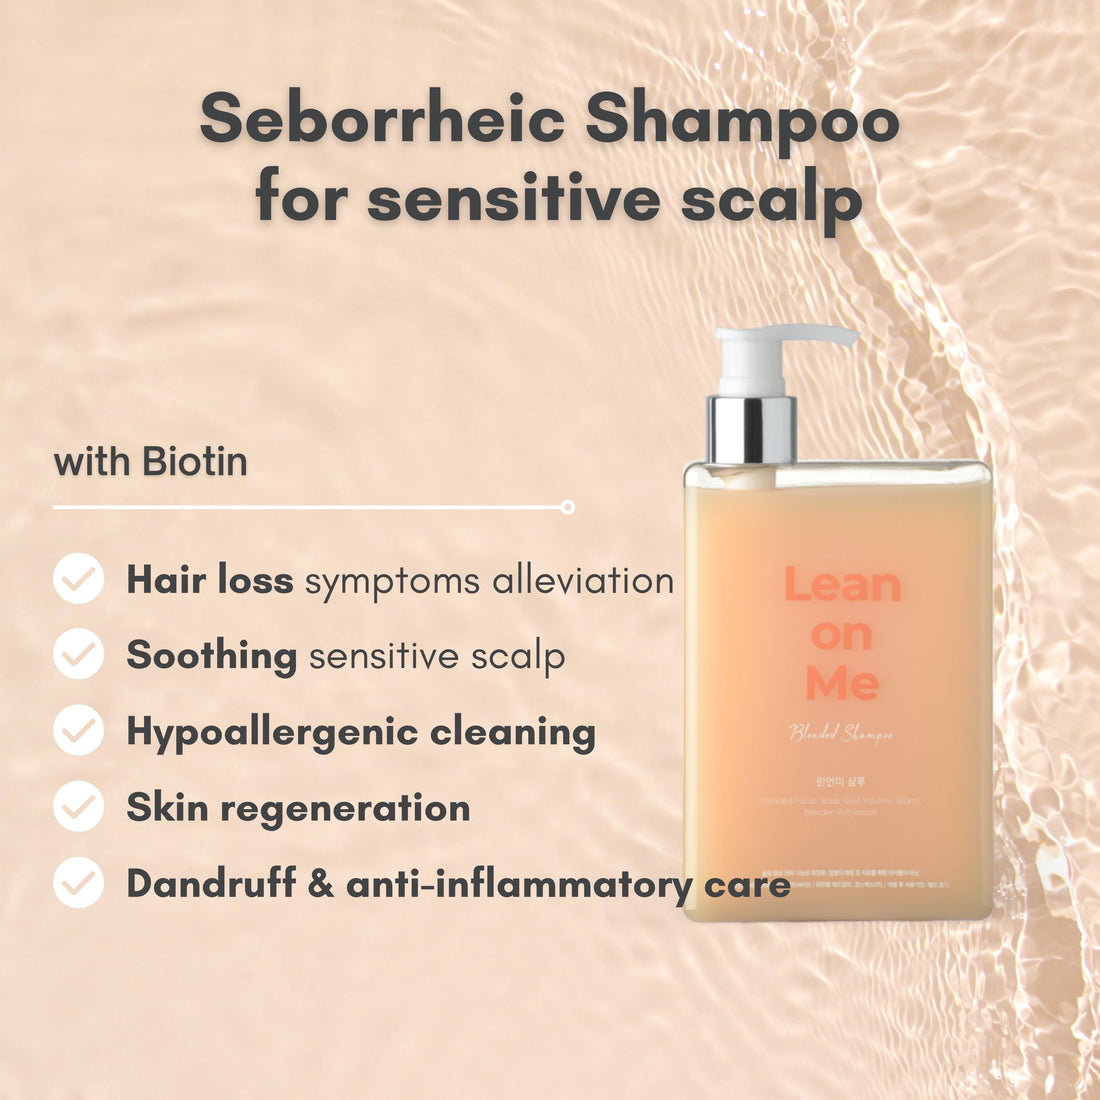 Seborrheic shampoo that improves dandruff, itchiness, and pimples, WithBecon leanonme Shampoo, best shampoo for hair loss, best shampoo for hair loss female, anti hair loss shampoo, dermatologist recommended shampoo for hair loss, hair loss shampoo for men, good shampoo for hair loss, best shampoo for hair loss men, best shampoo and conditioner for hair loss, shampoo to prevent hair loss, shampoo to help with hair loss, mild shampoo for hair loss, organic shampoo for hair loss